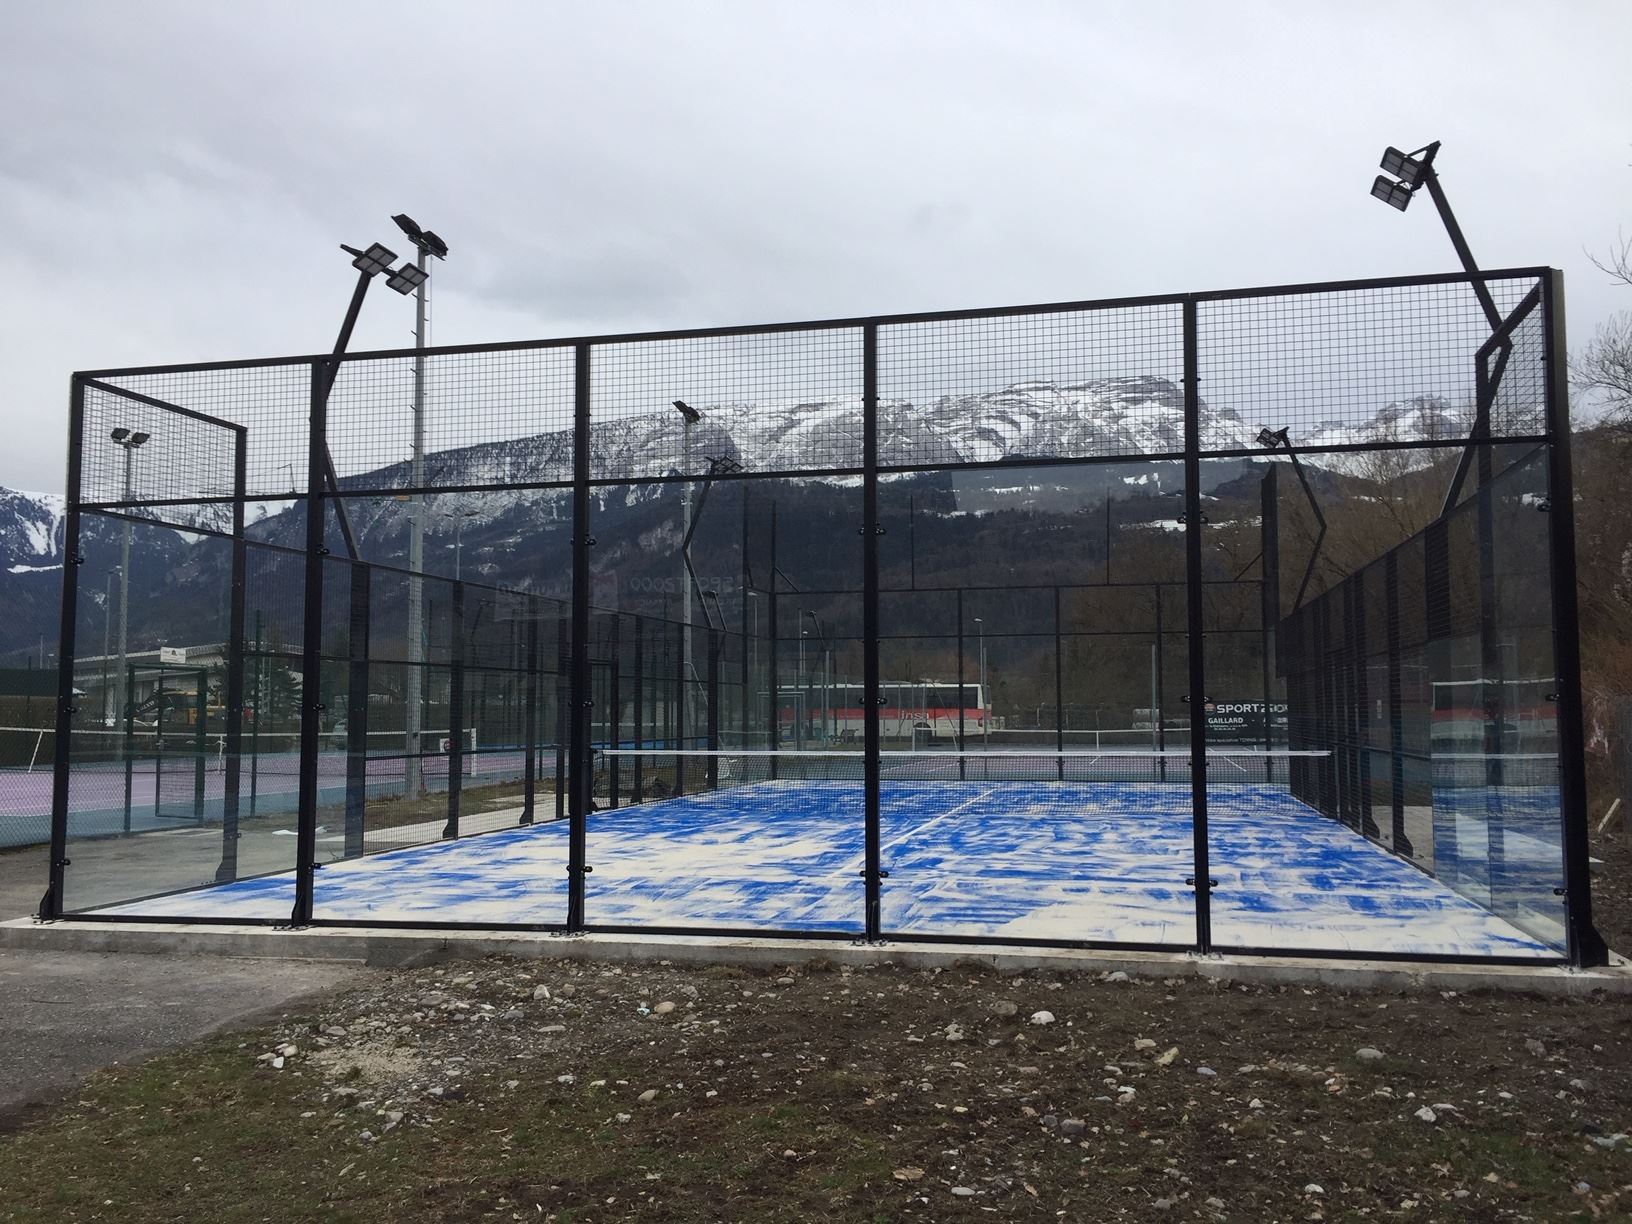 2 courts of padel at the Marignier Tennis Club